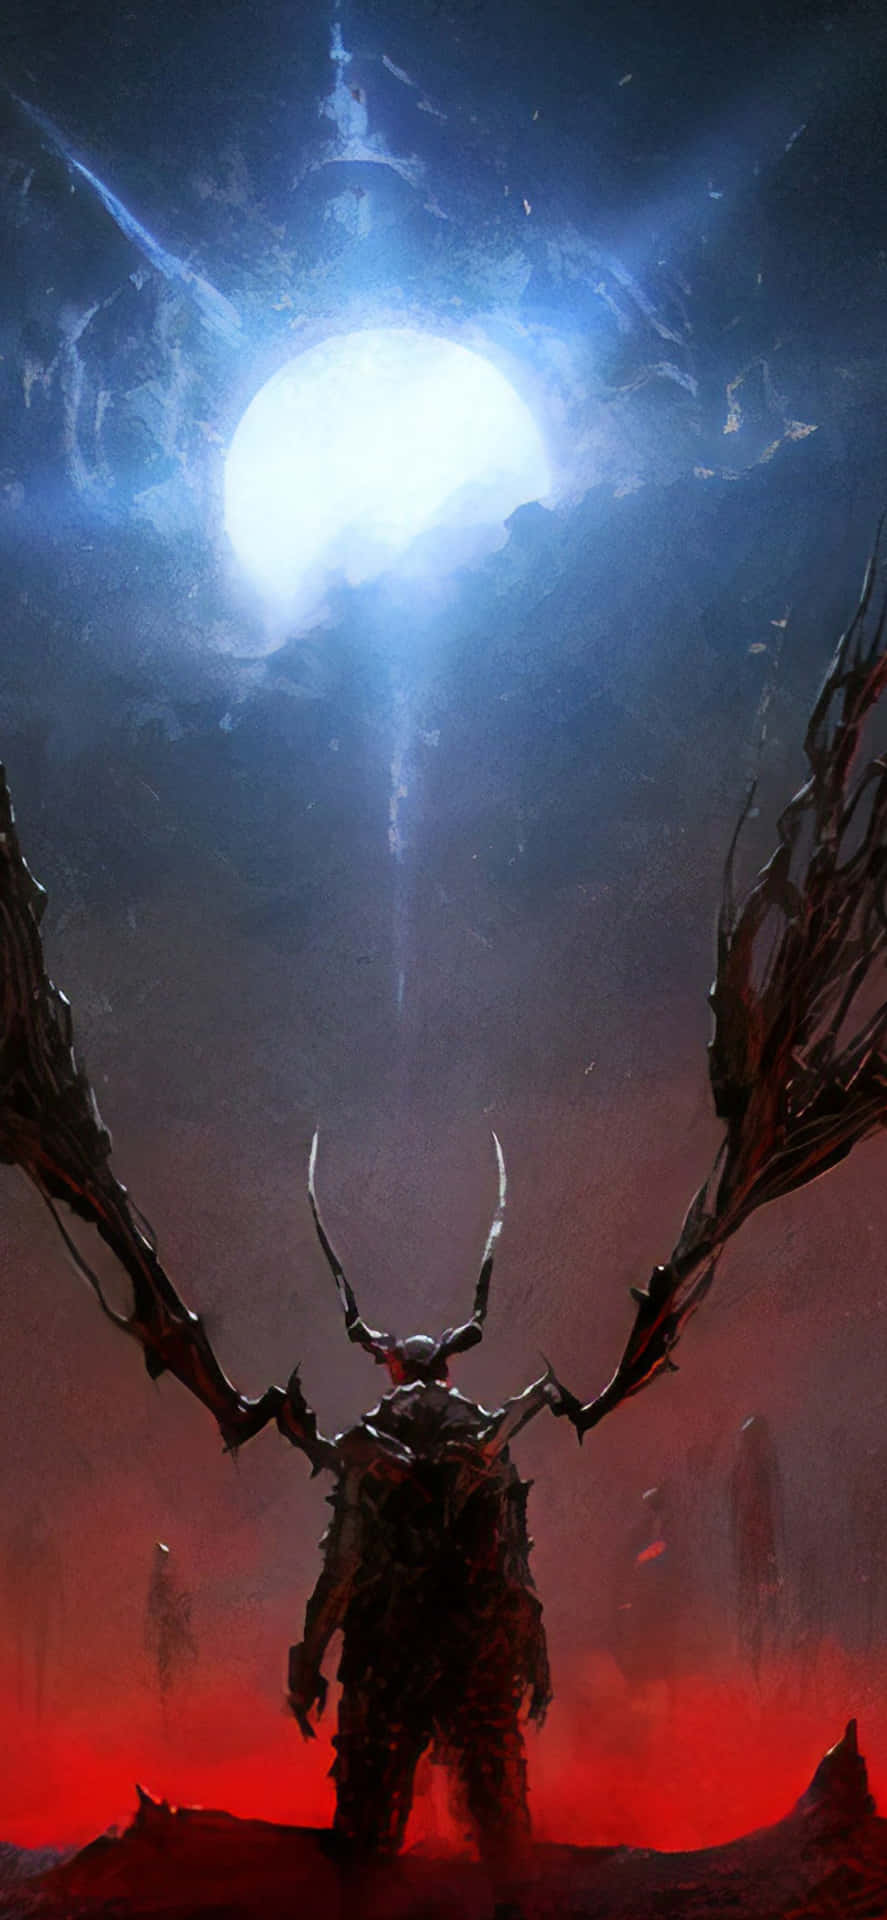 A Demon With Wings Standing In The Desert Wallpaper